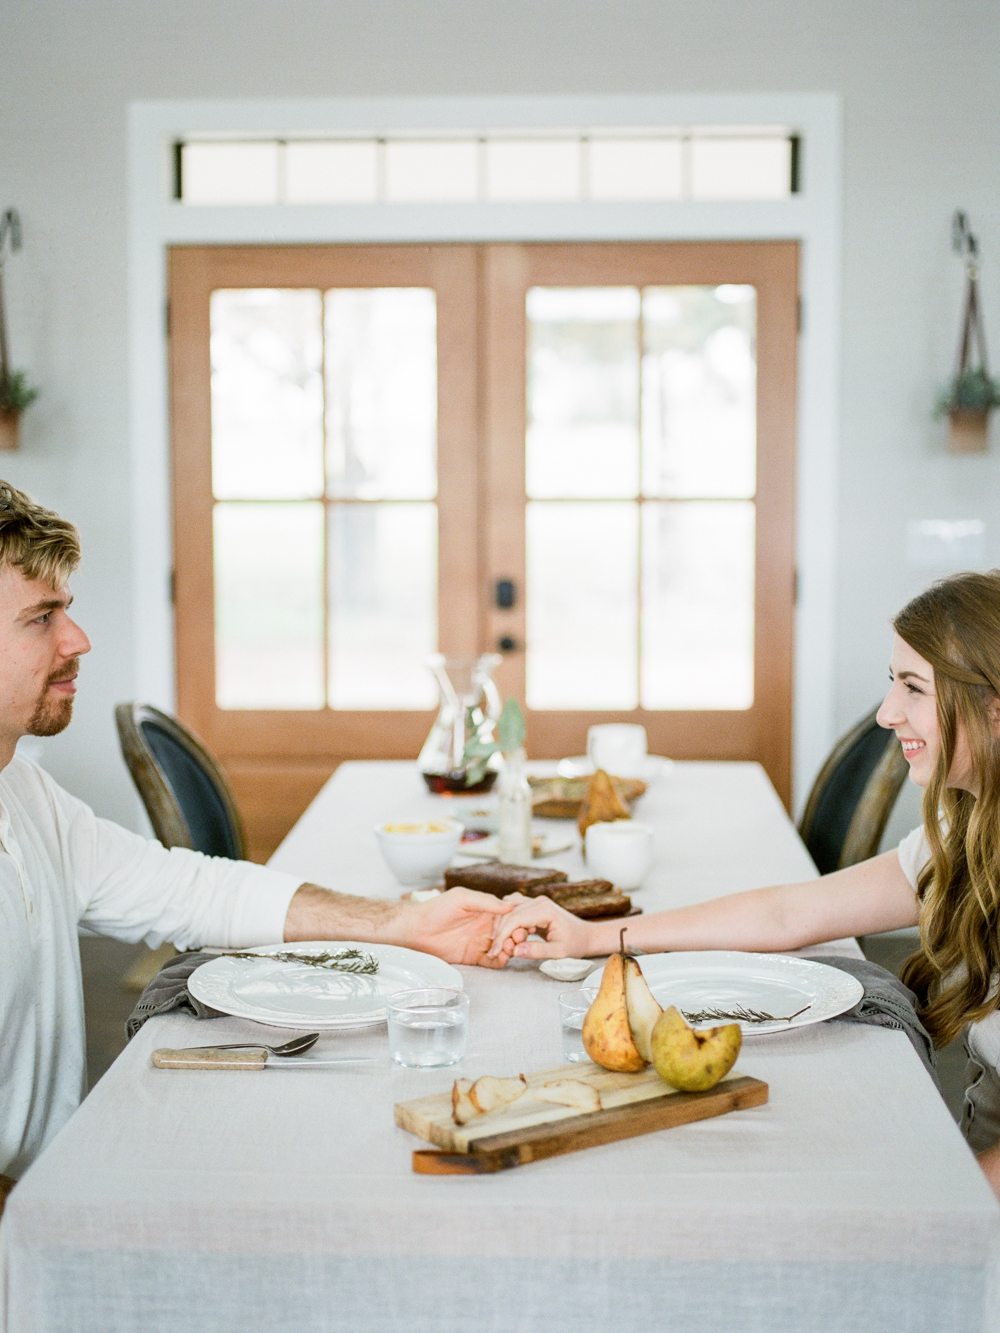 at home engagement session - Christine Gosch - featured on Magnolia Rouge - film photographer - elopement and intimate wedding photographer-19.jpg